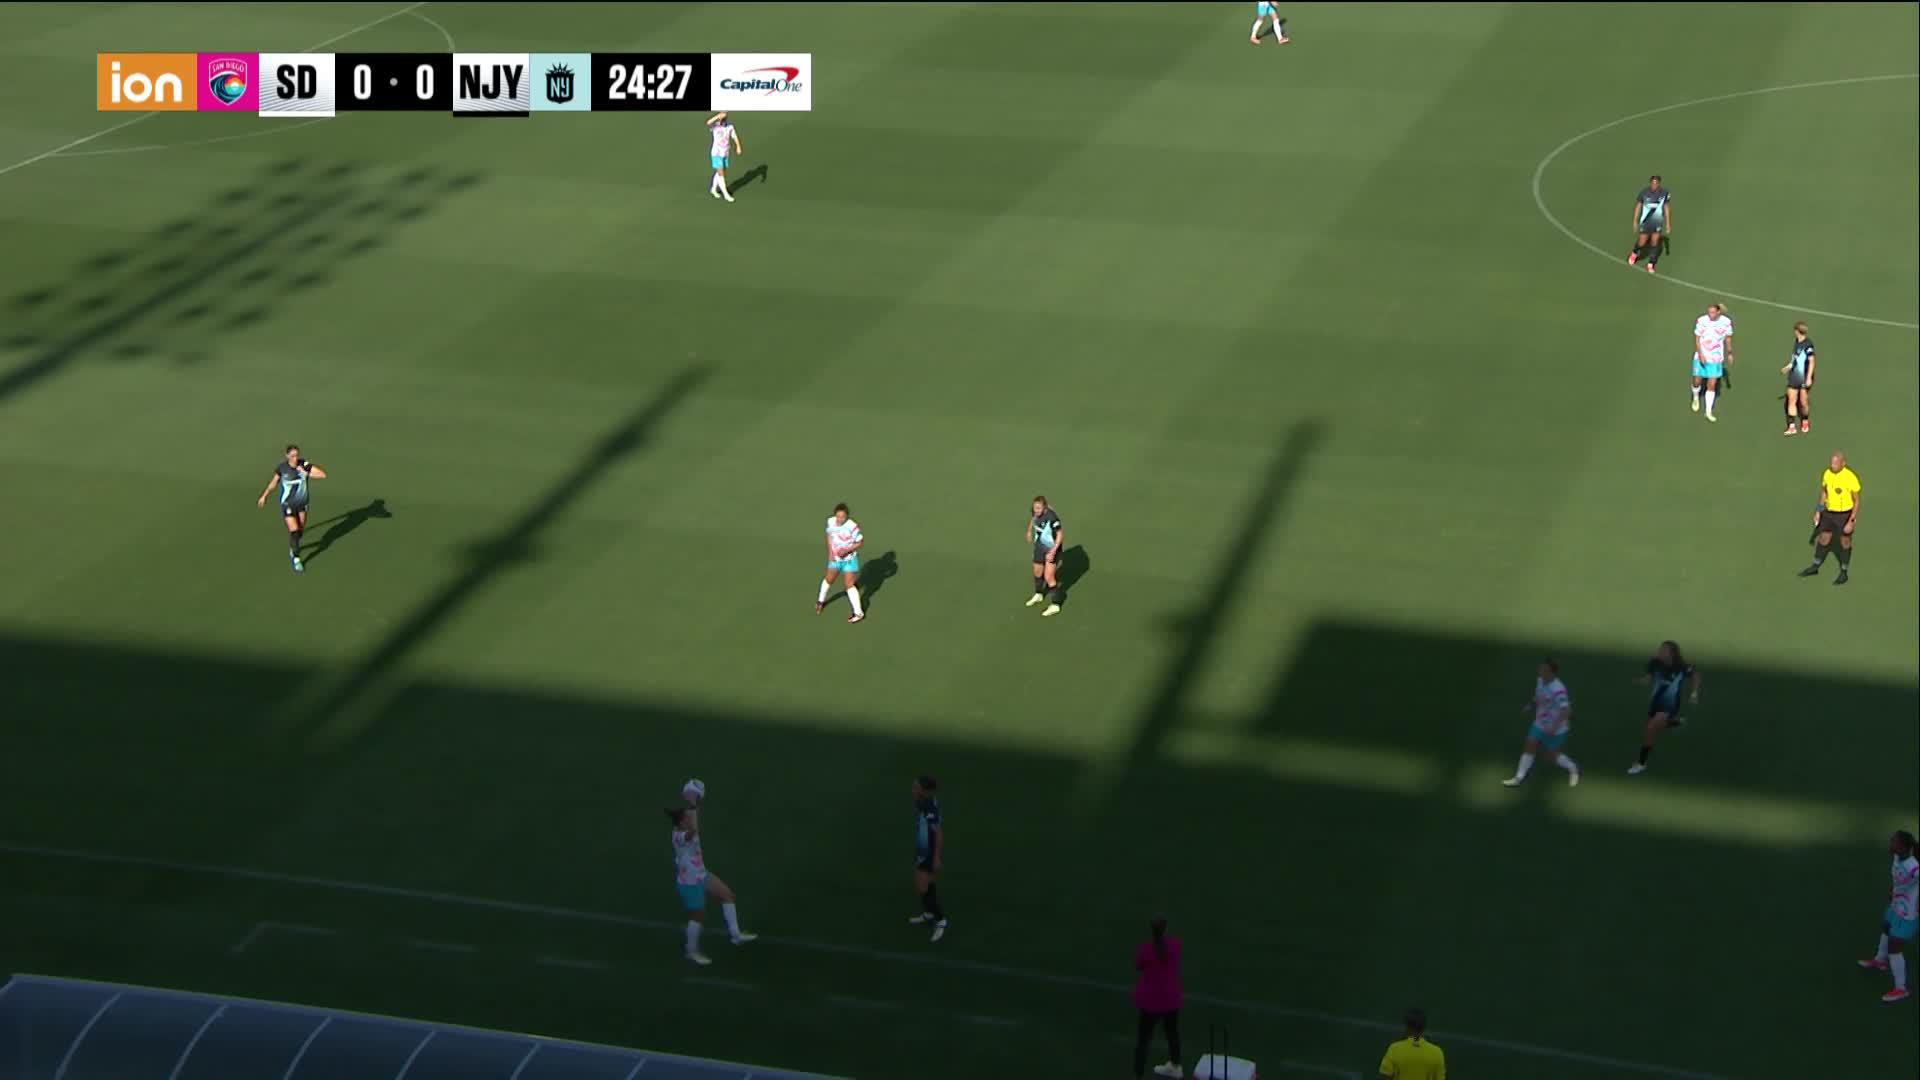 Ella Stevens with the amazing touch to put Gotham up 1-0!Catch all the action on @IONNWSL!